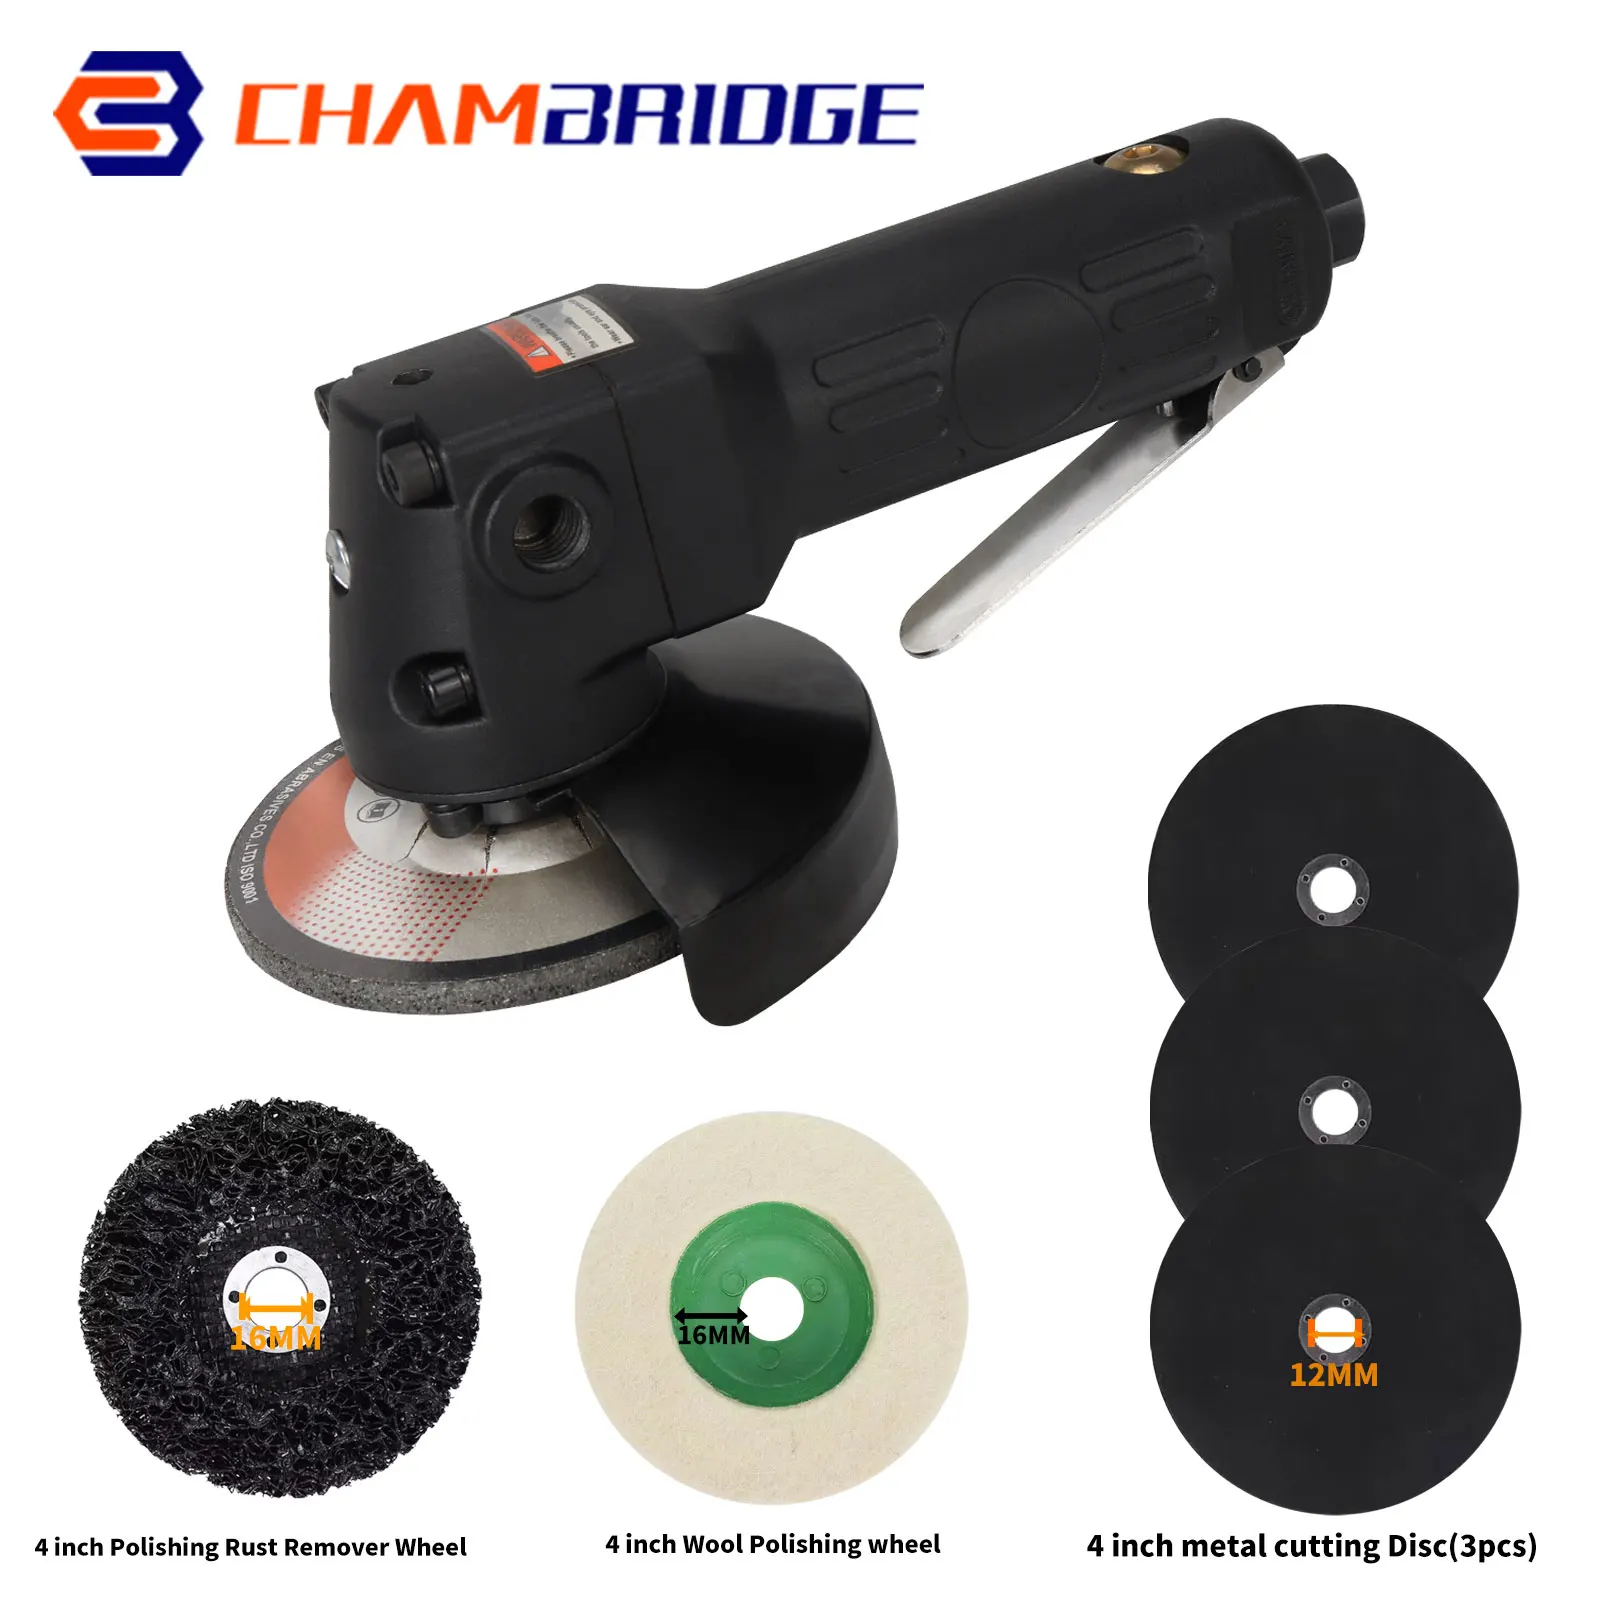 grating diaphragm meter wheel photoelectric speed grating measuring disc sieg c3 220 readout panel High Speed Air Angle Grinder 4 